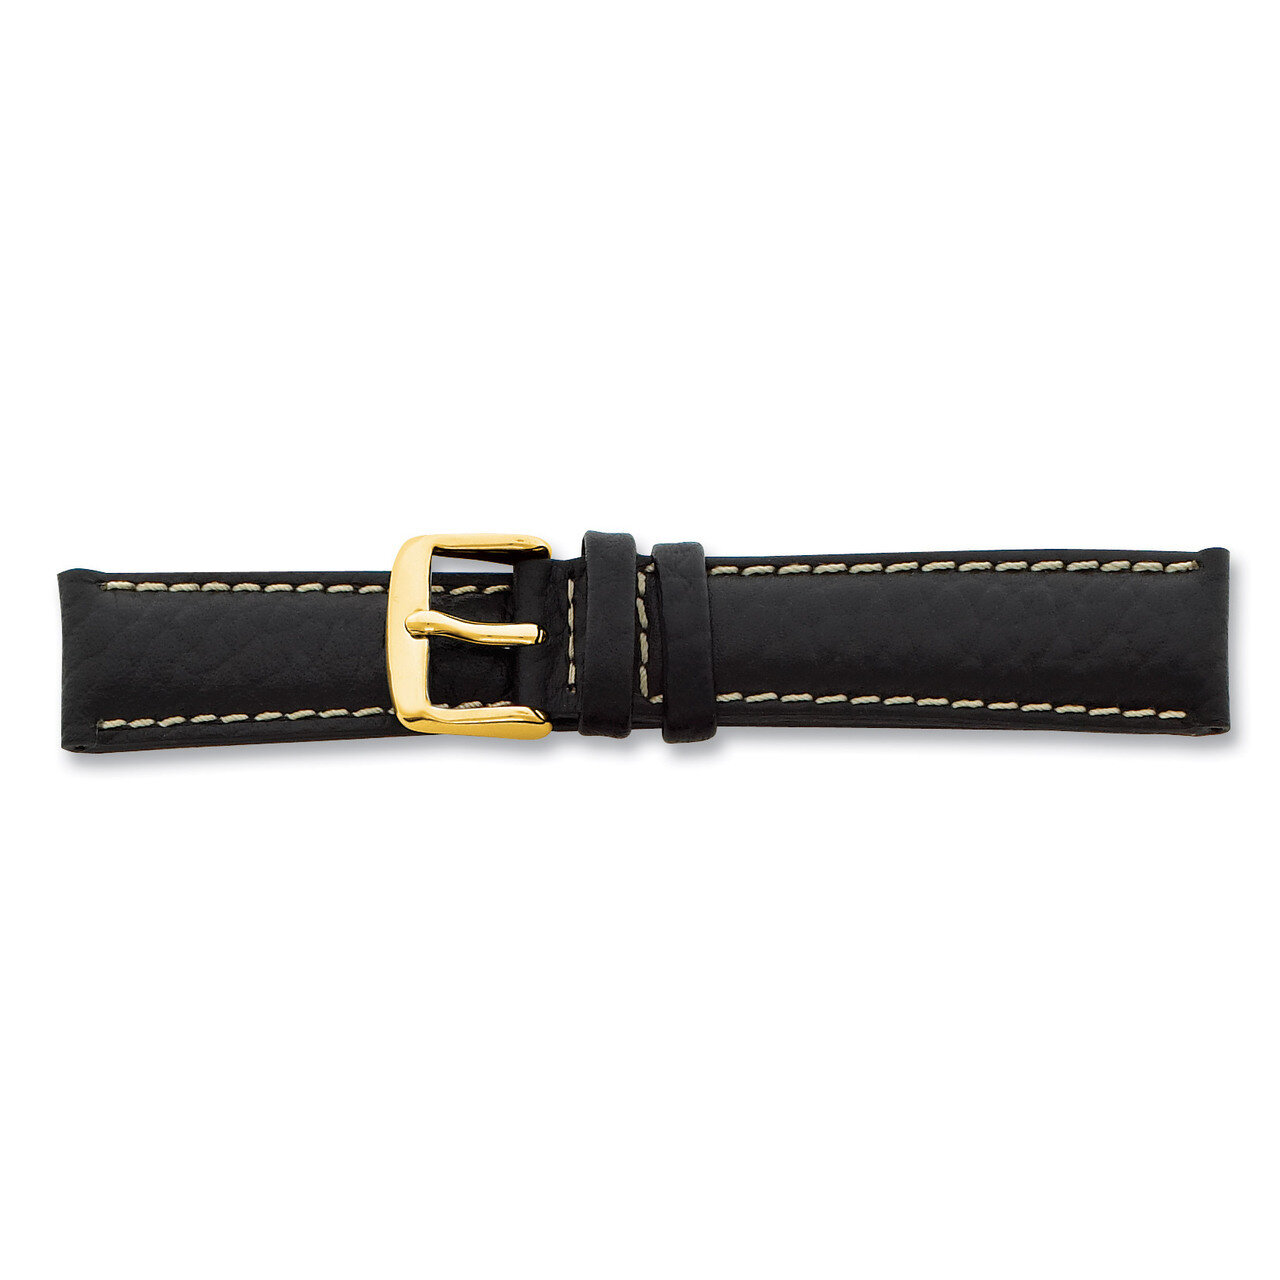 18mm Black Leather White Stitch Buckle Watch Band 7.5 Inch Gold-tone BAY99-18